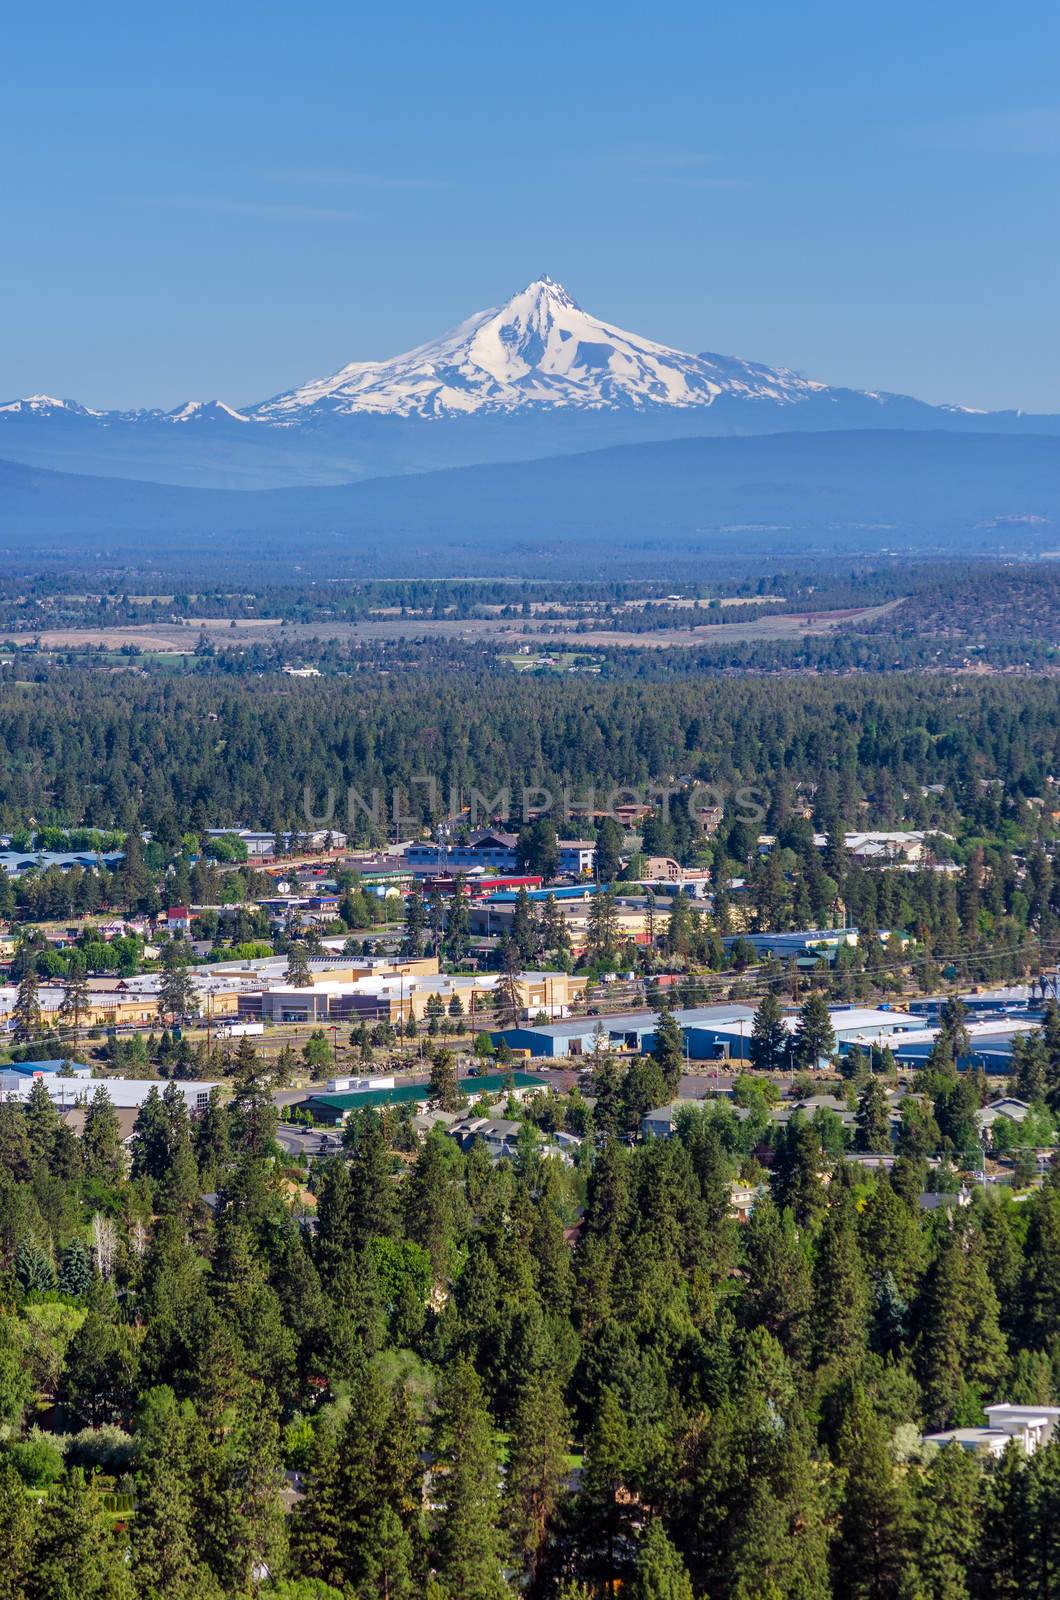 Vertical view of Mount Jefferson and the city of Bend in Central Oregon